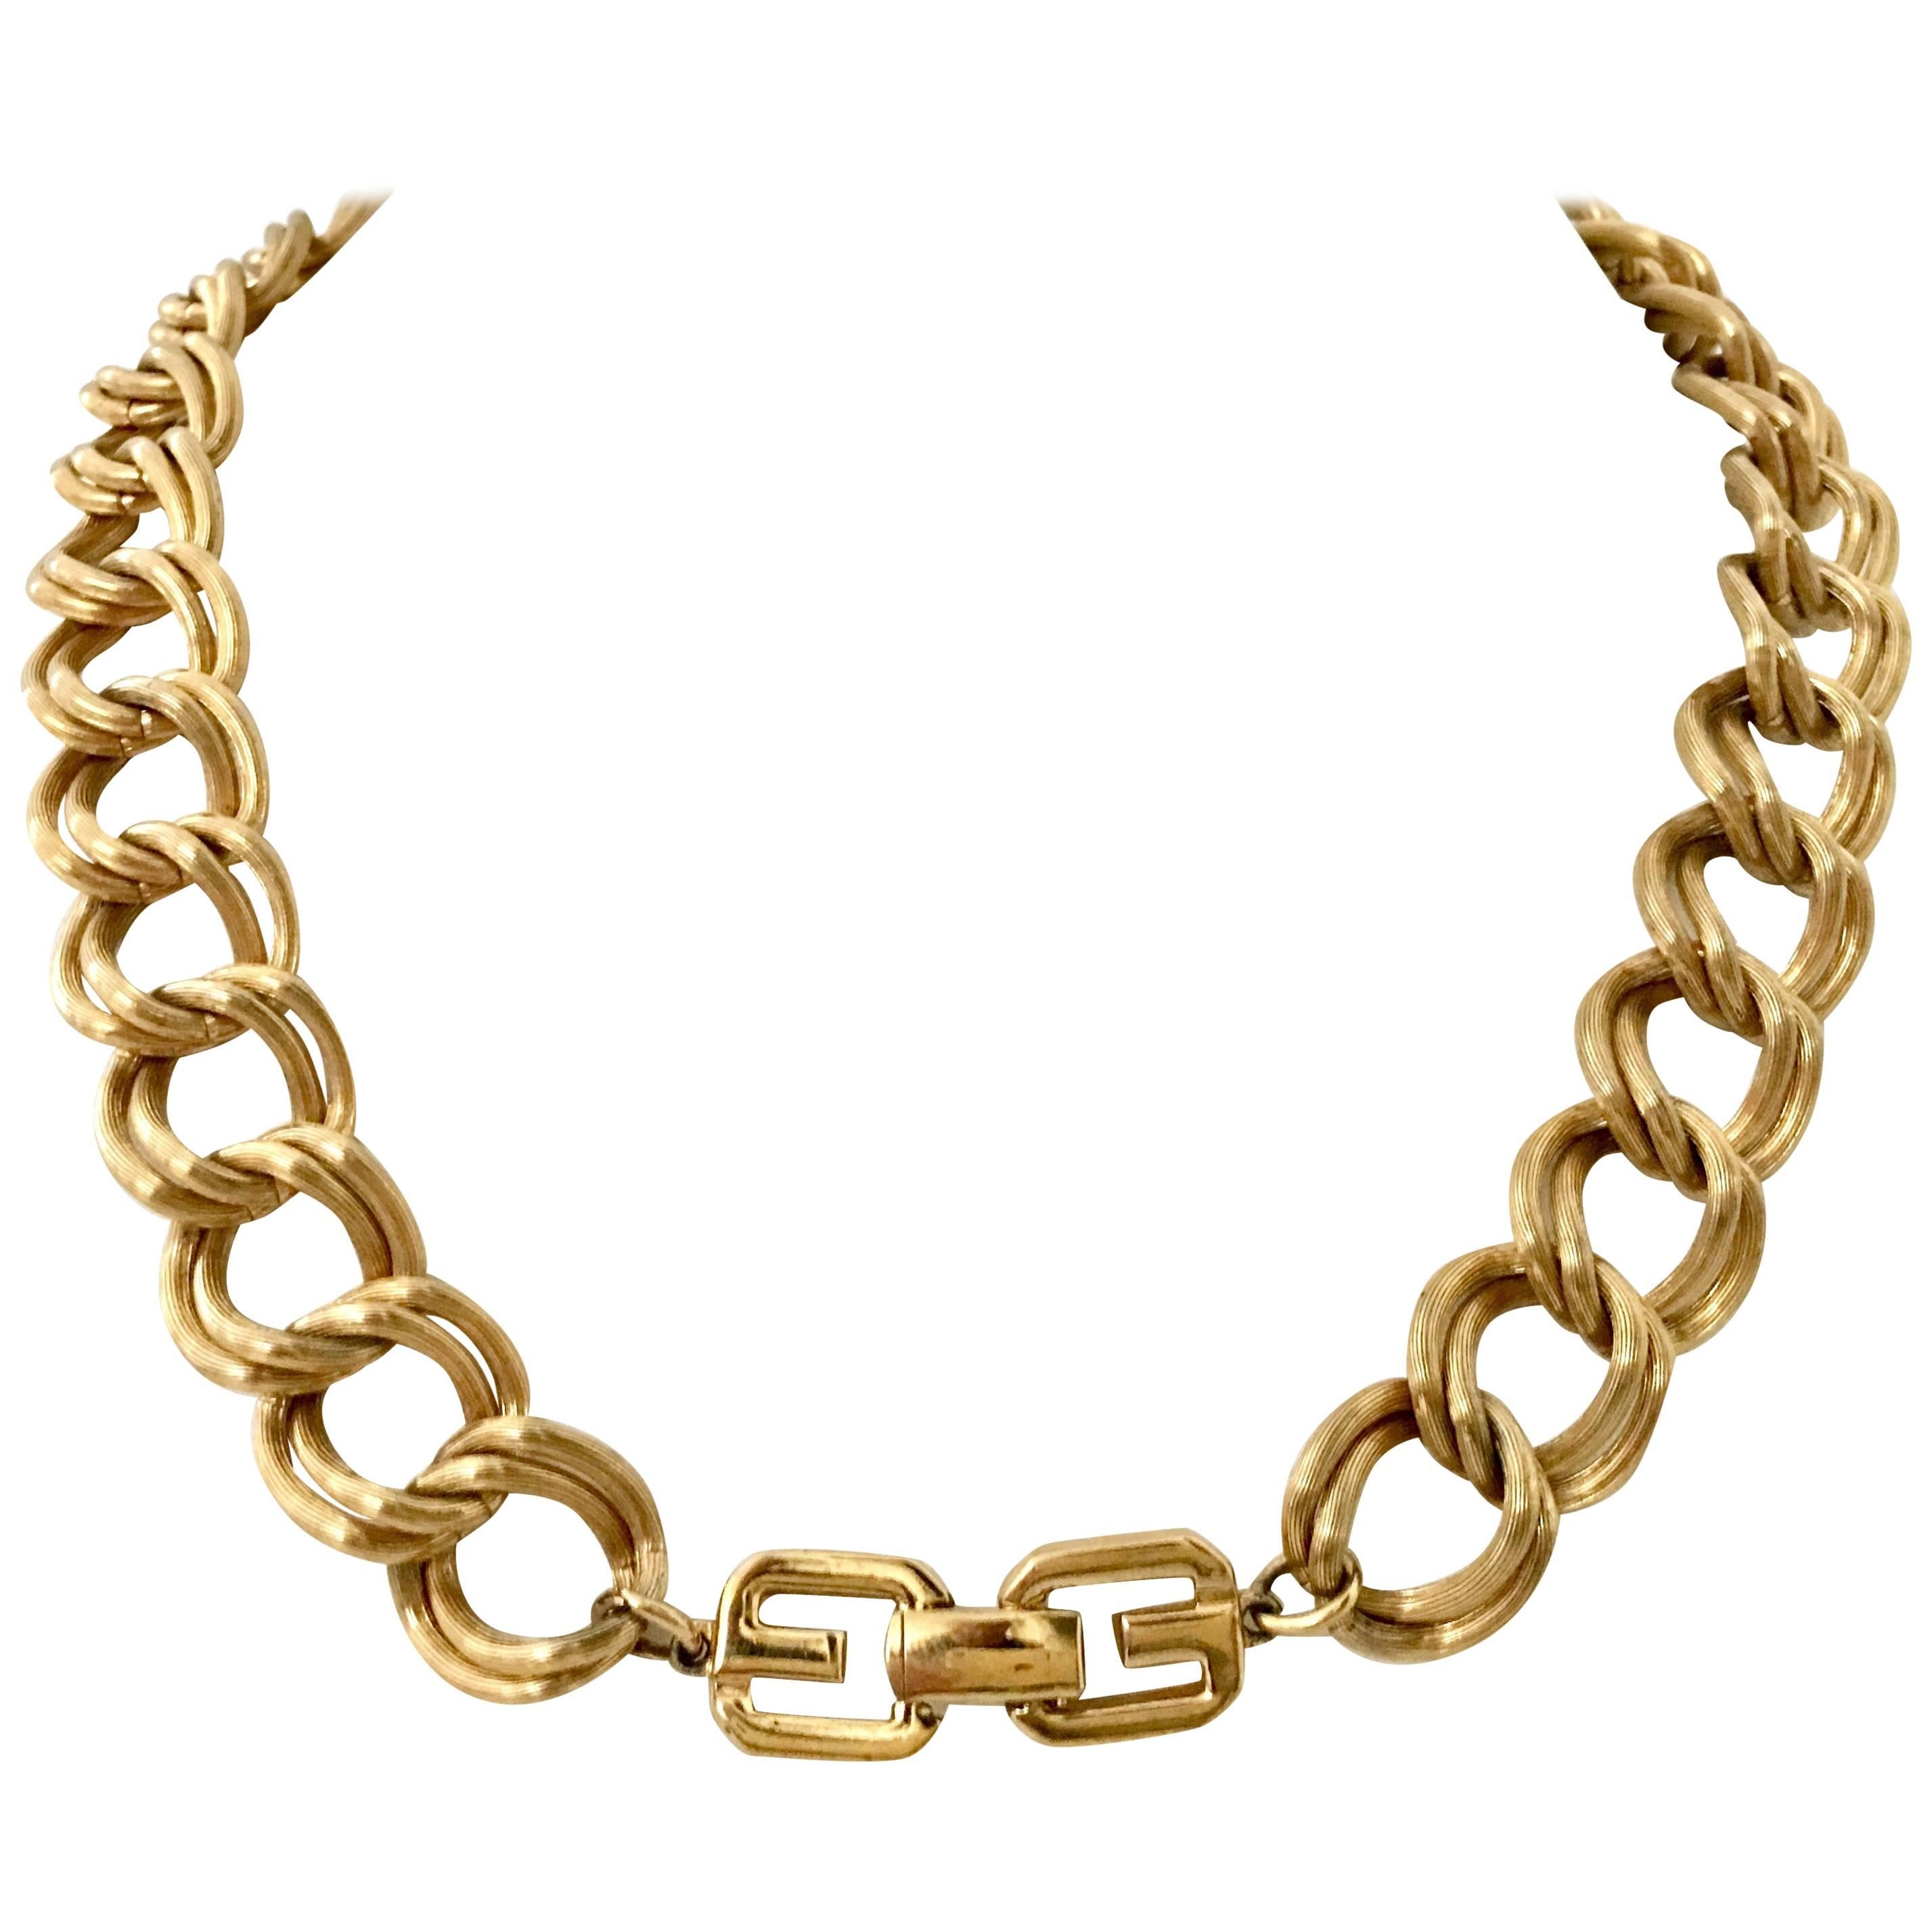 20th Century Givenchy Gold "GG" Logo Double Chain Link Choker Necklace